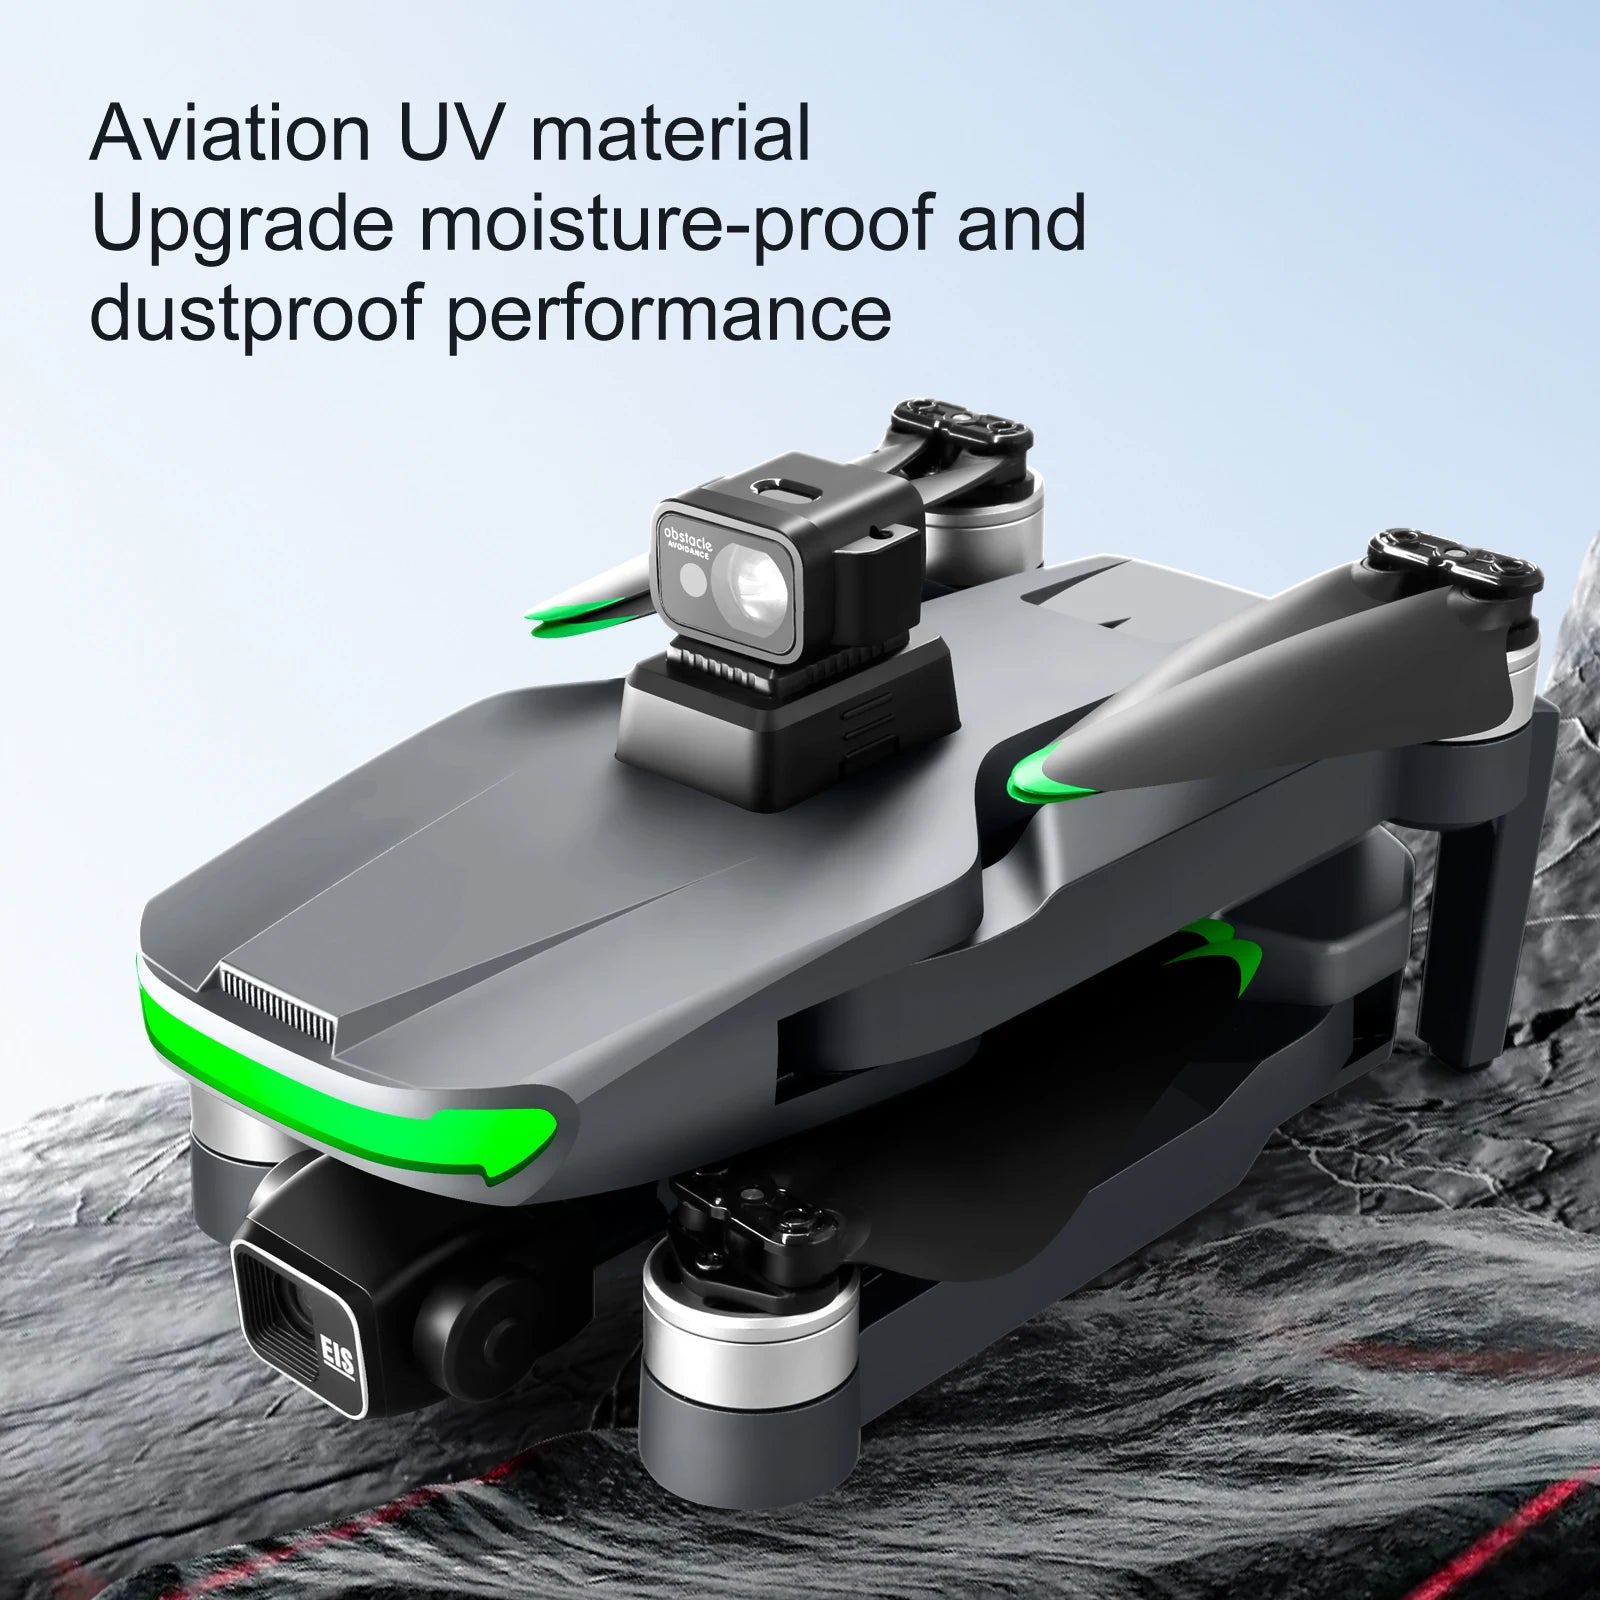 S155 Drone, Aviation UV material Upgrade moisture-proof and dustproof performance 66] obslodle